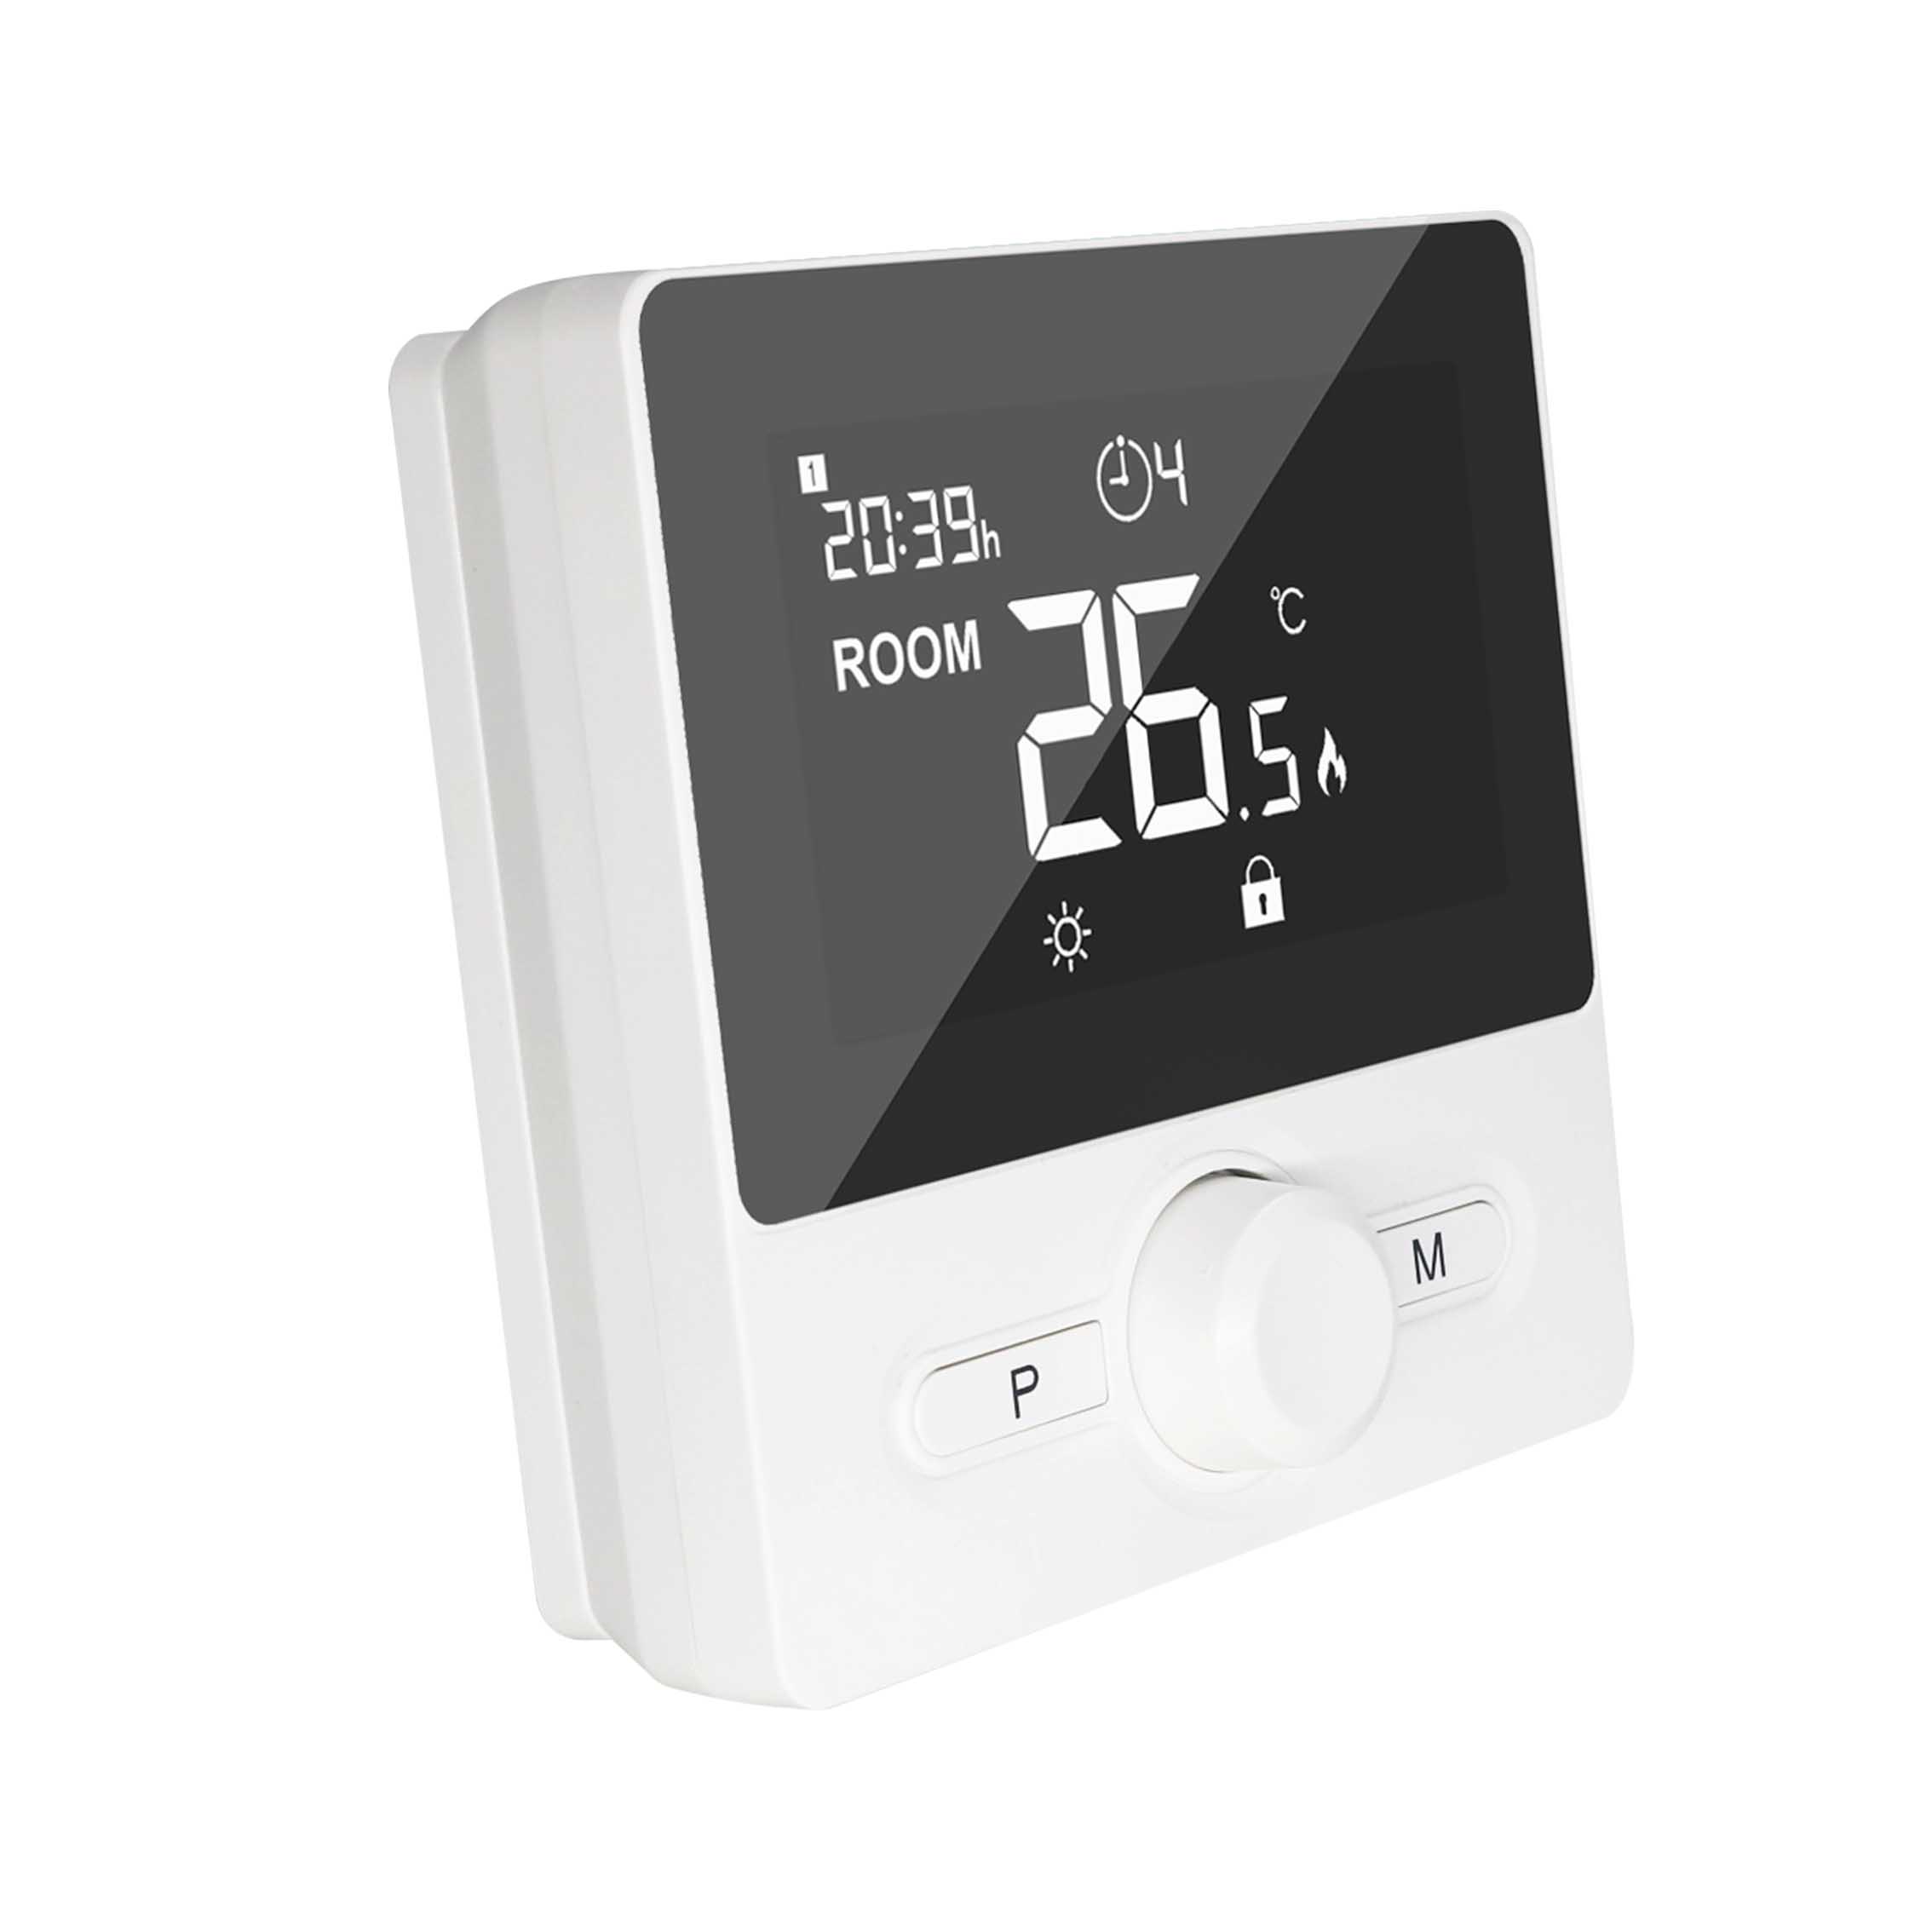 Wired Programmable Dial Thermostat for Boiler Heating